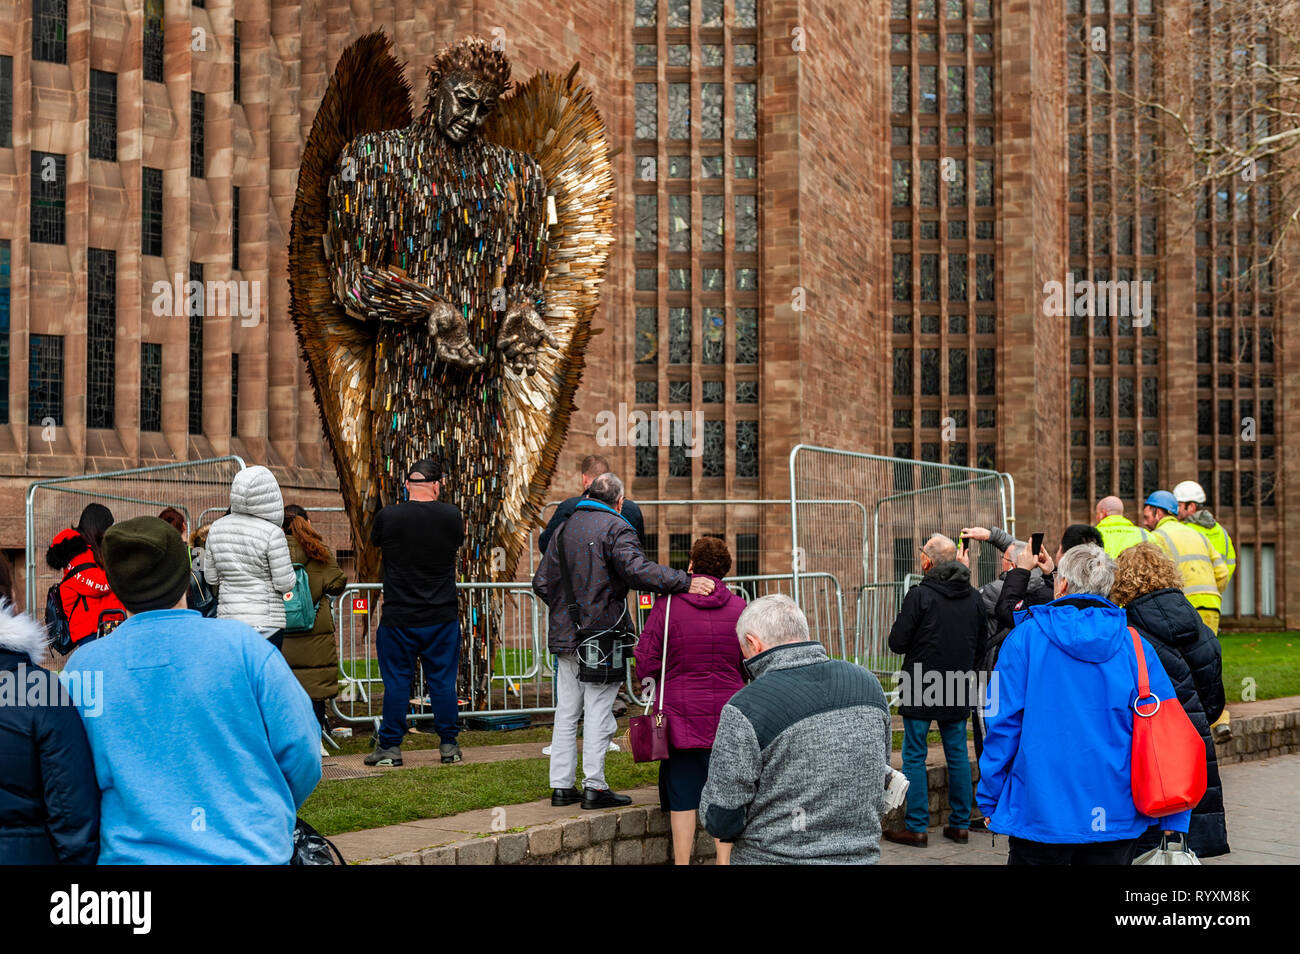 Coventry, West Midlands, UK. 15th March, 2019. The Knife Angel which was installed at Coventry Cathedral yesterday drew big crowds of spectators today.  The country is currently in a grip of knife violence. It is hoped the sculpture will highlight the issue and have a positive effect on the public. Credit: Andy Gibson/Alamy Live News. Stock Photo